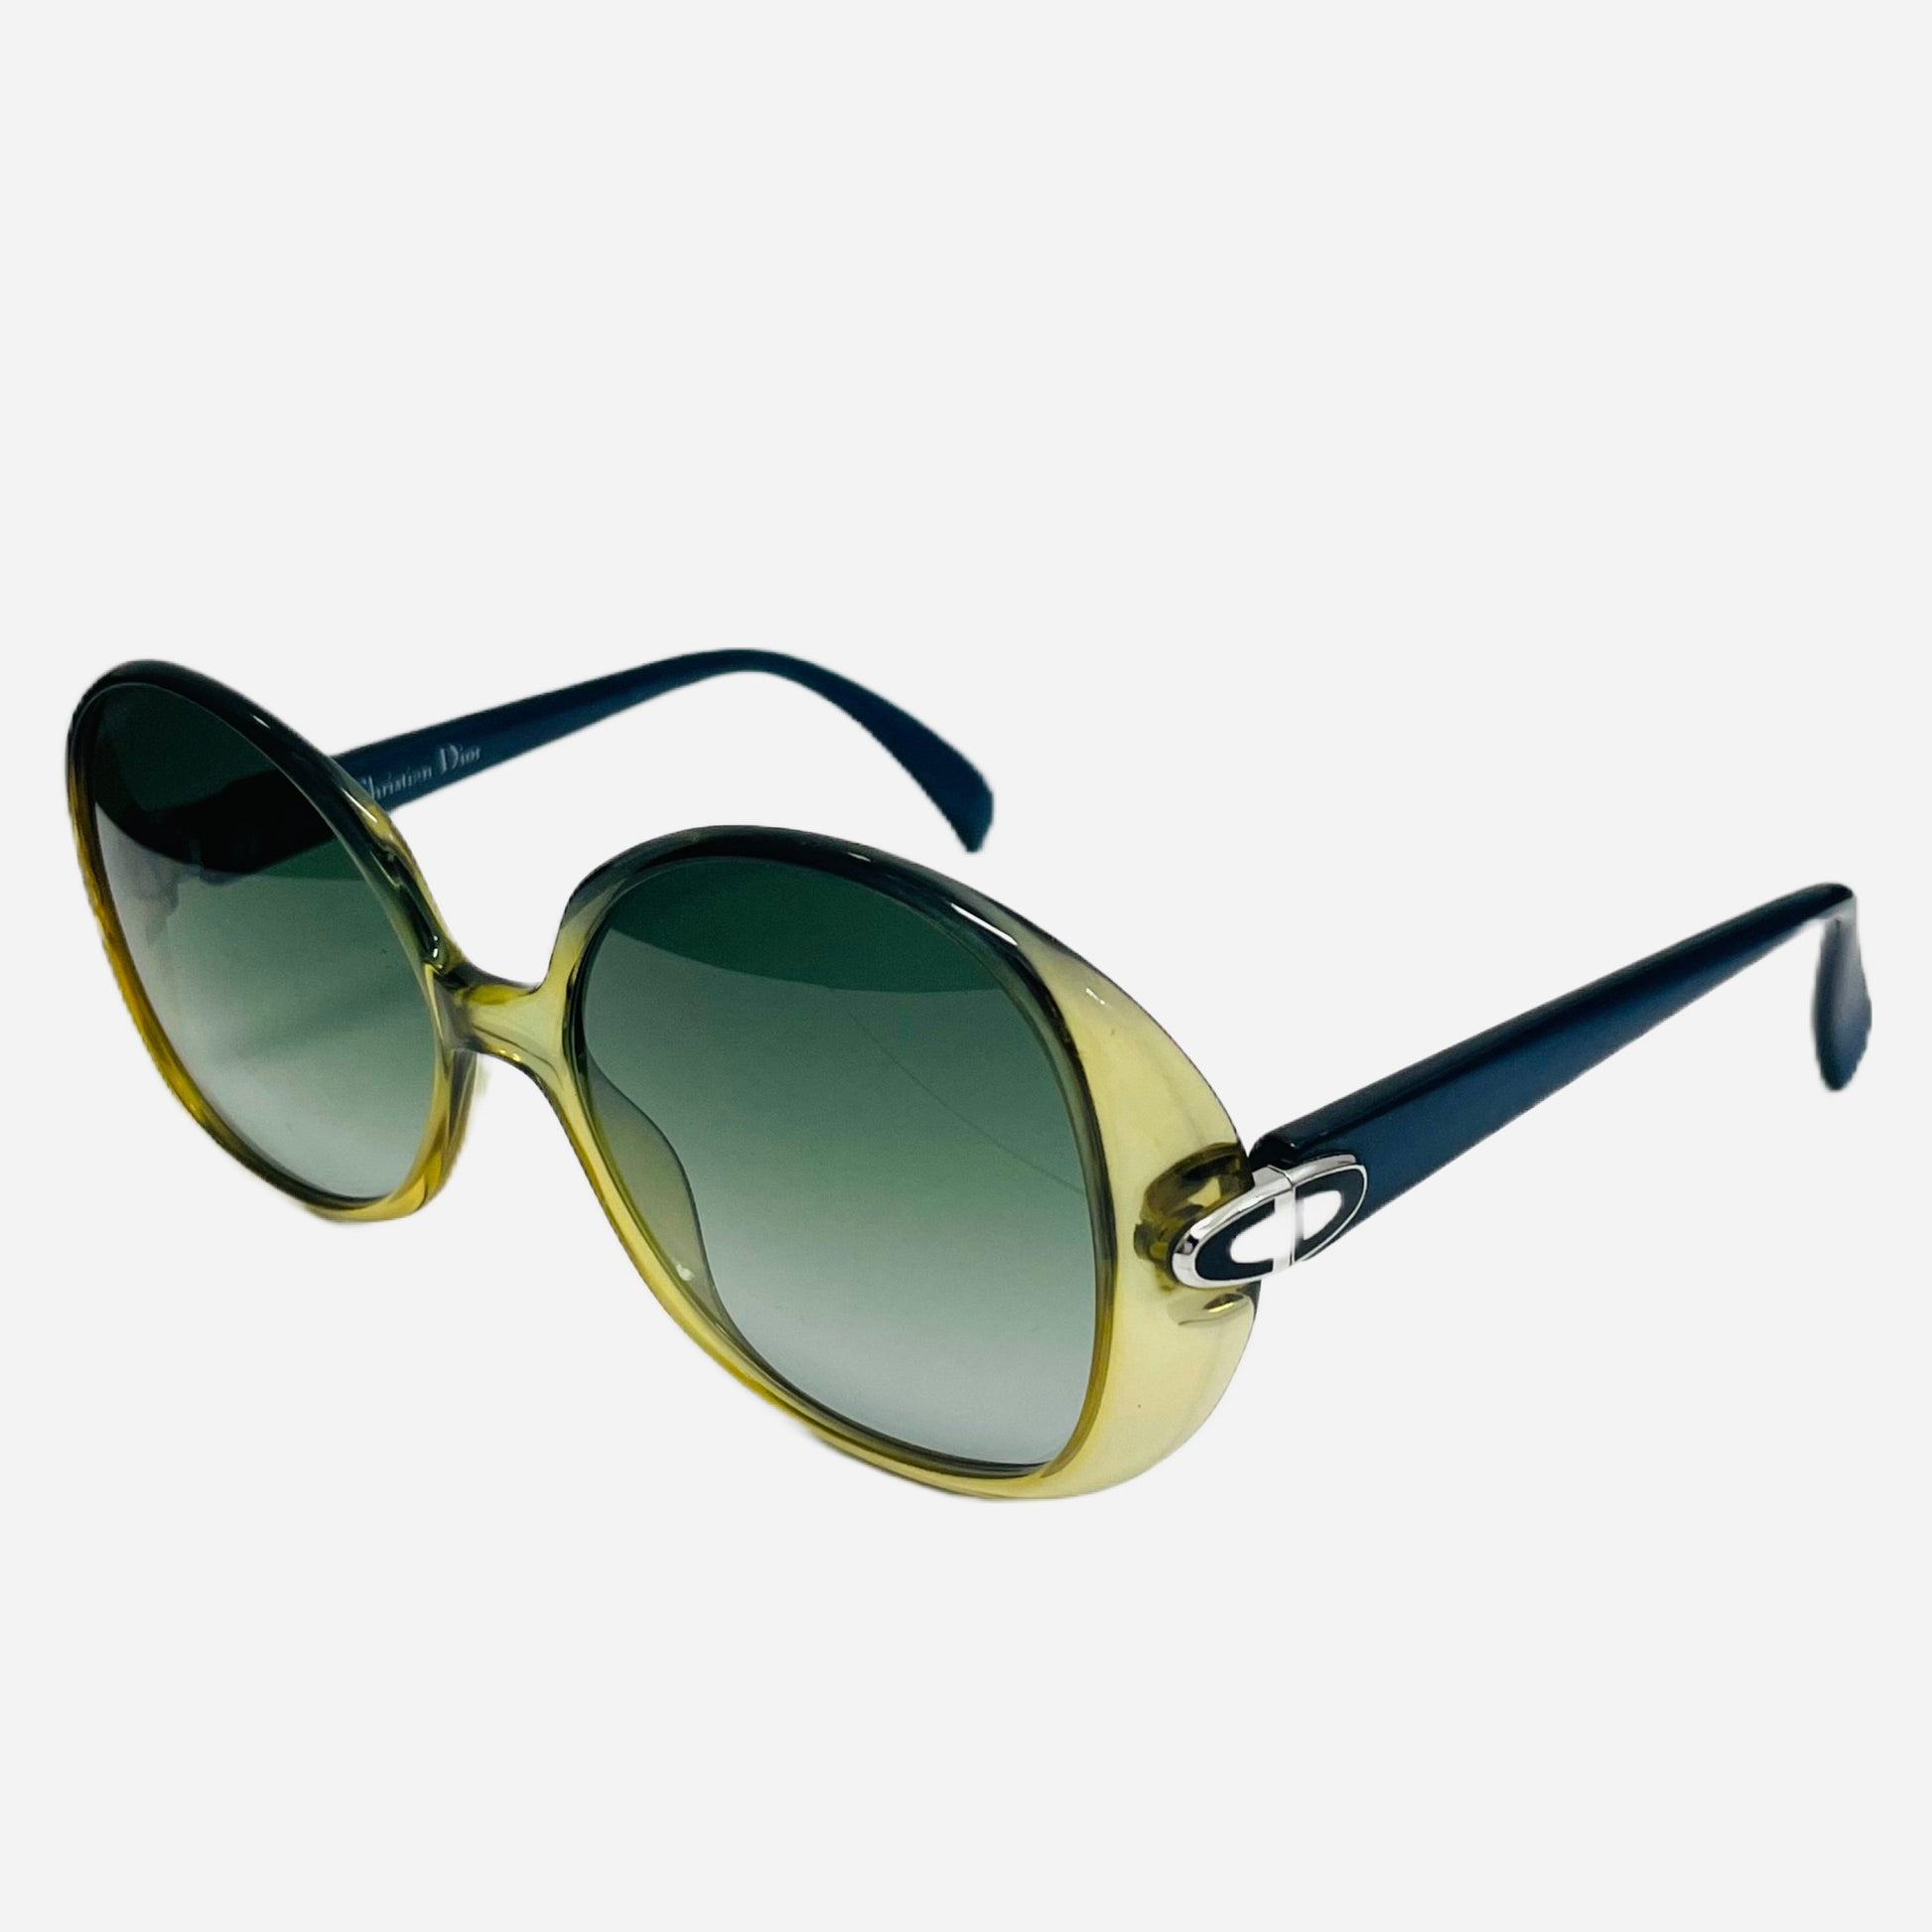 Vintage-Christian-Dior-Sonnenbrille-Sonnenbrille-2049-Optyl-the-seekers-front-side